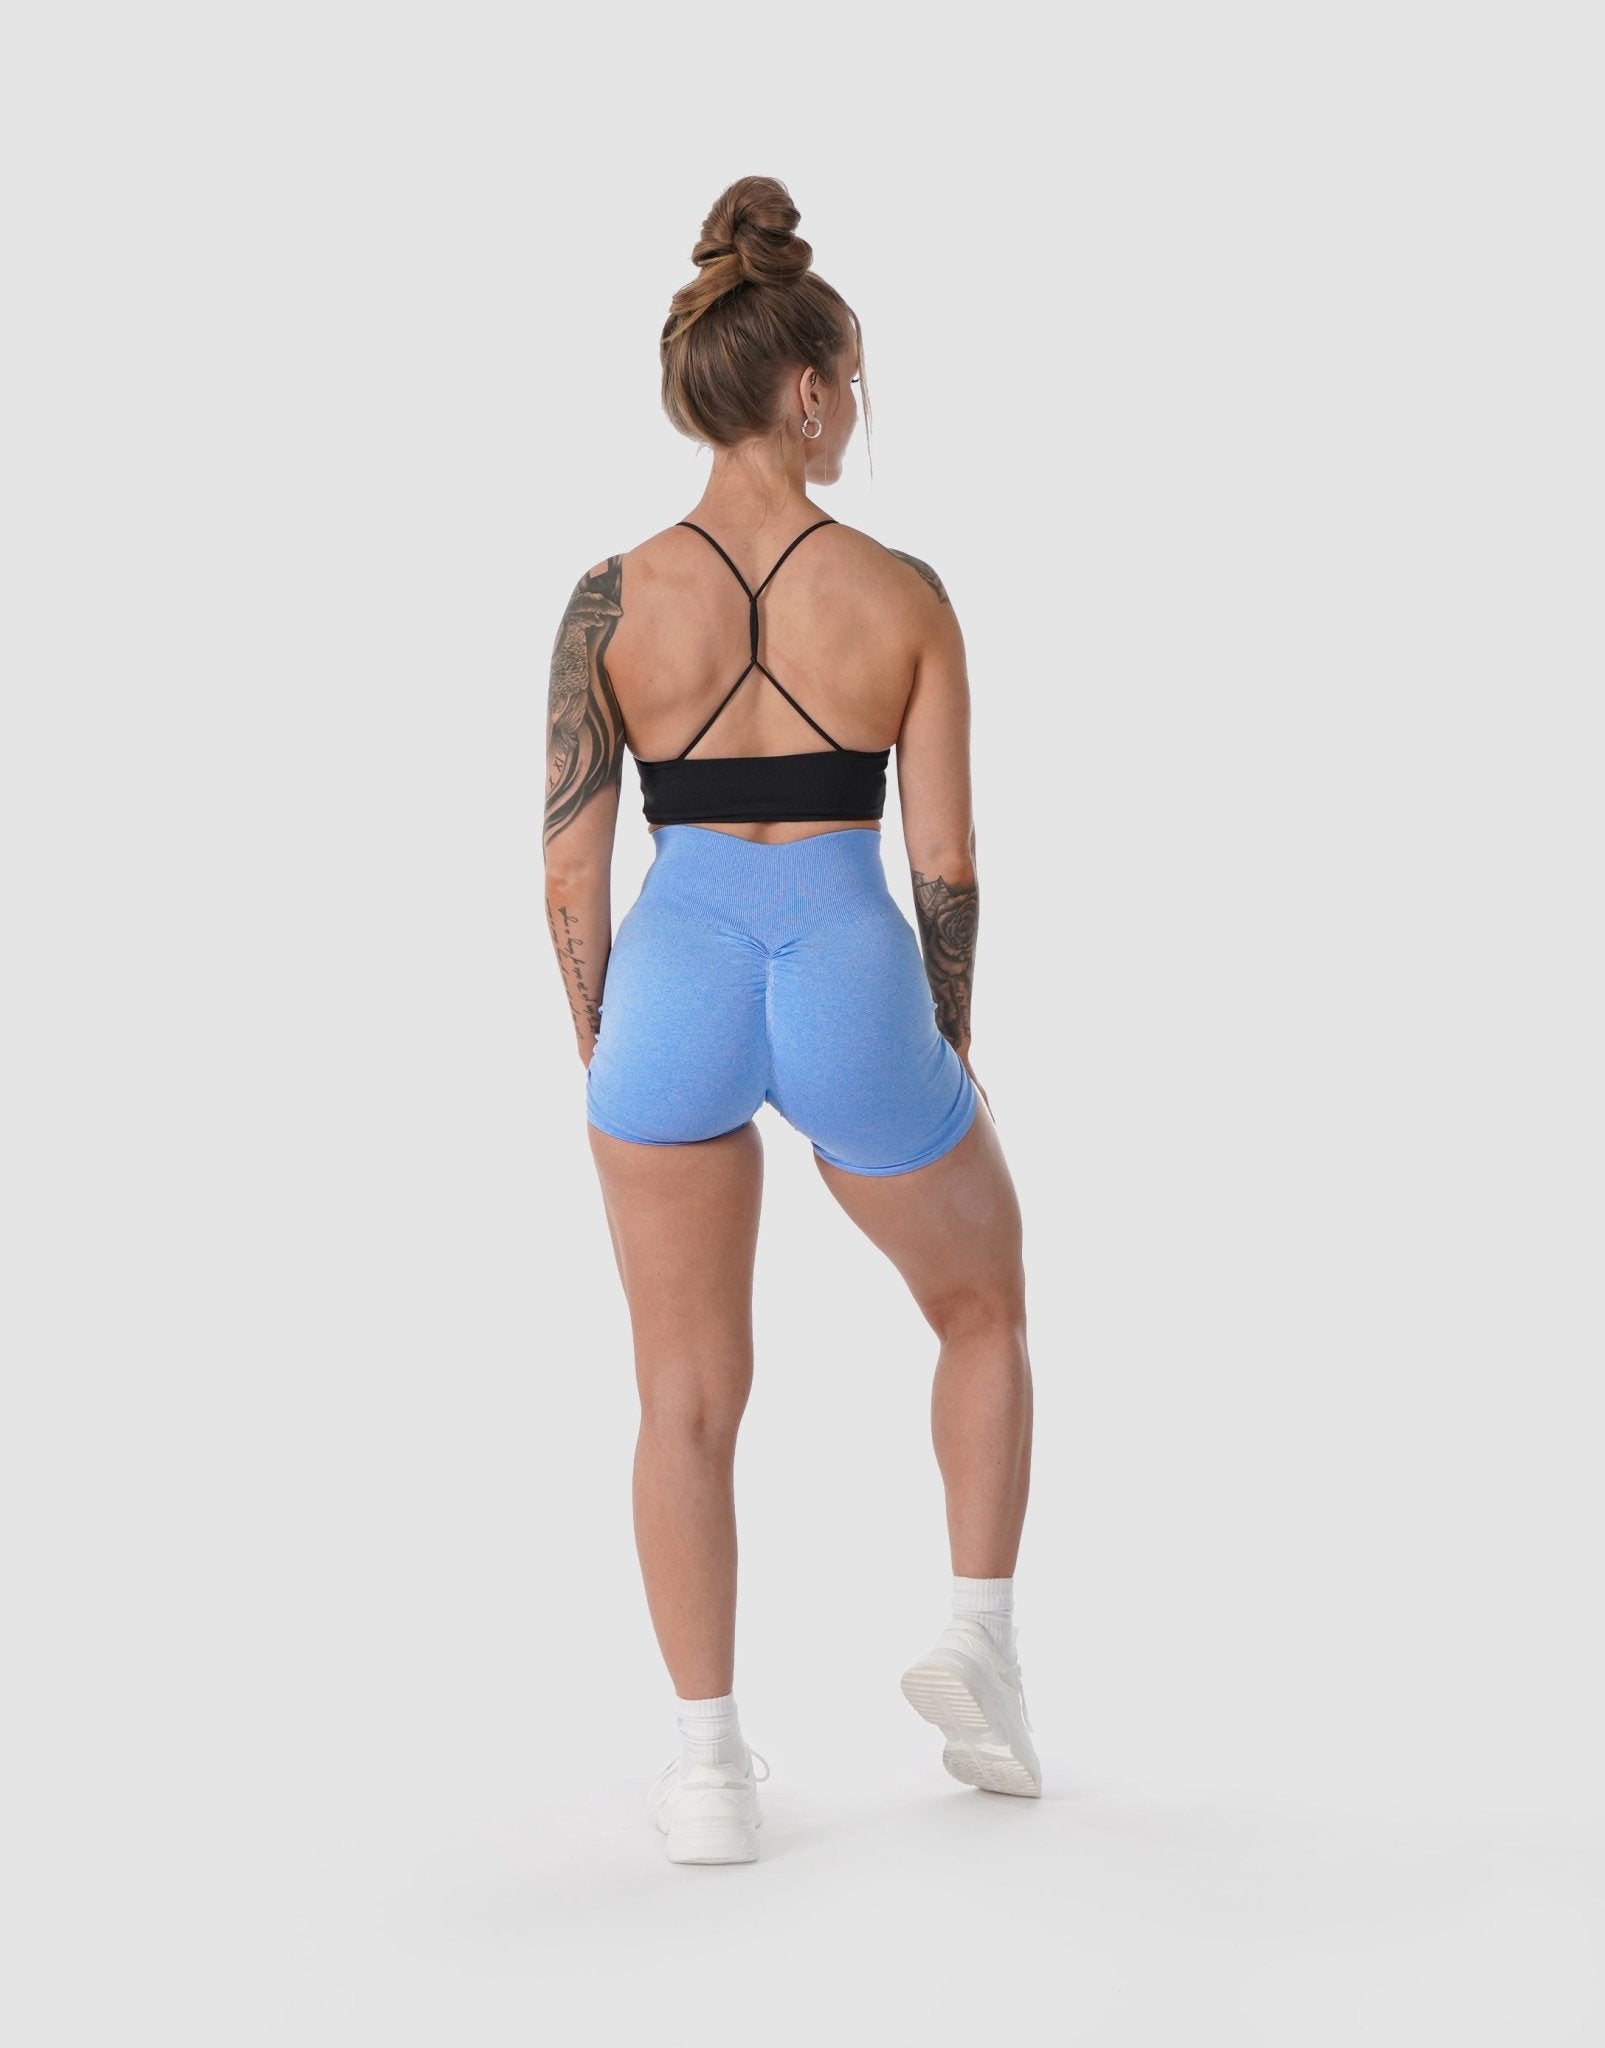 SUPERFLOWER Ruched Booty Shorts for Women Scrunch Butt Push Up Gym Running  Sports Back Bow Tie Design Gym Leggings